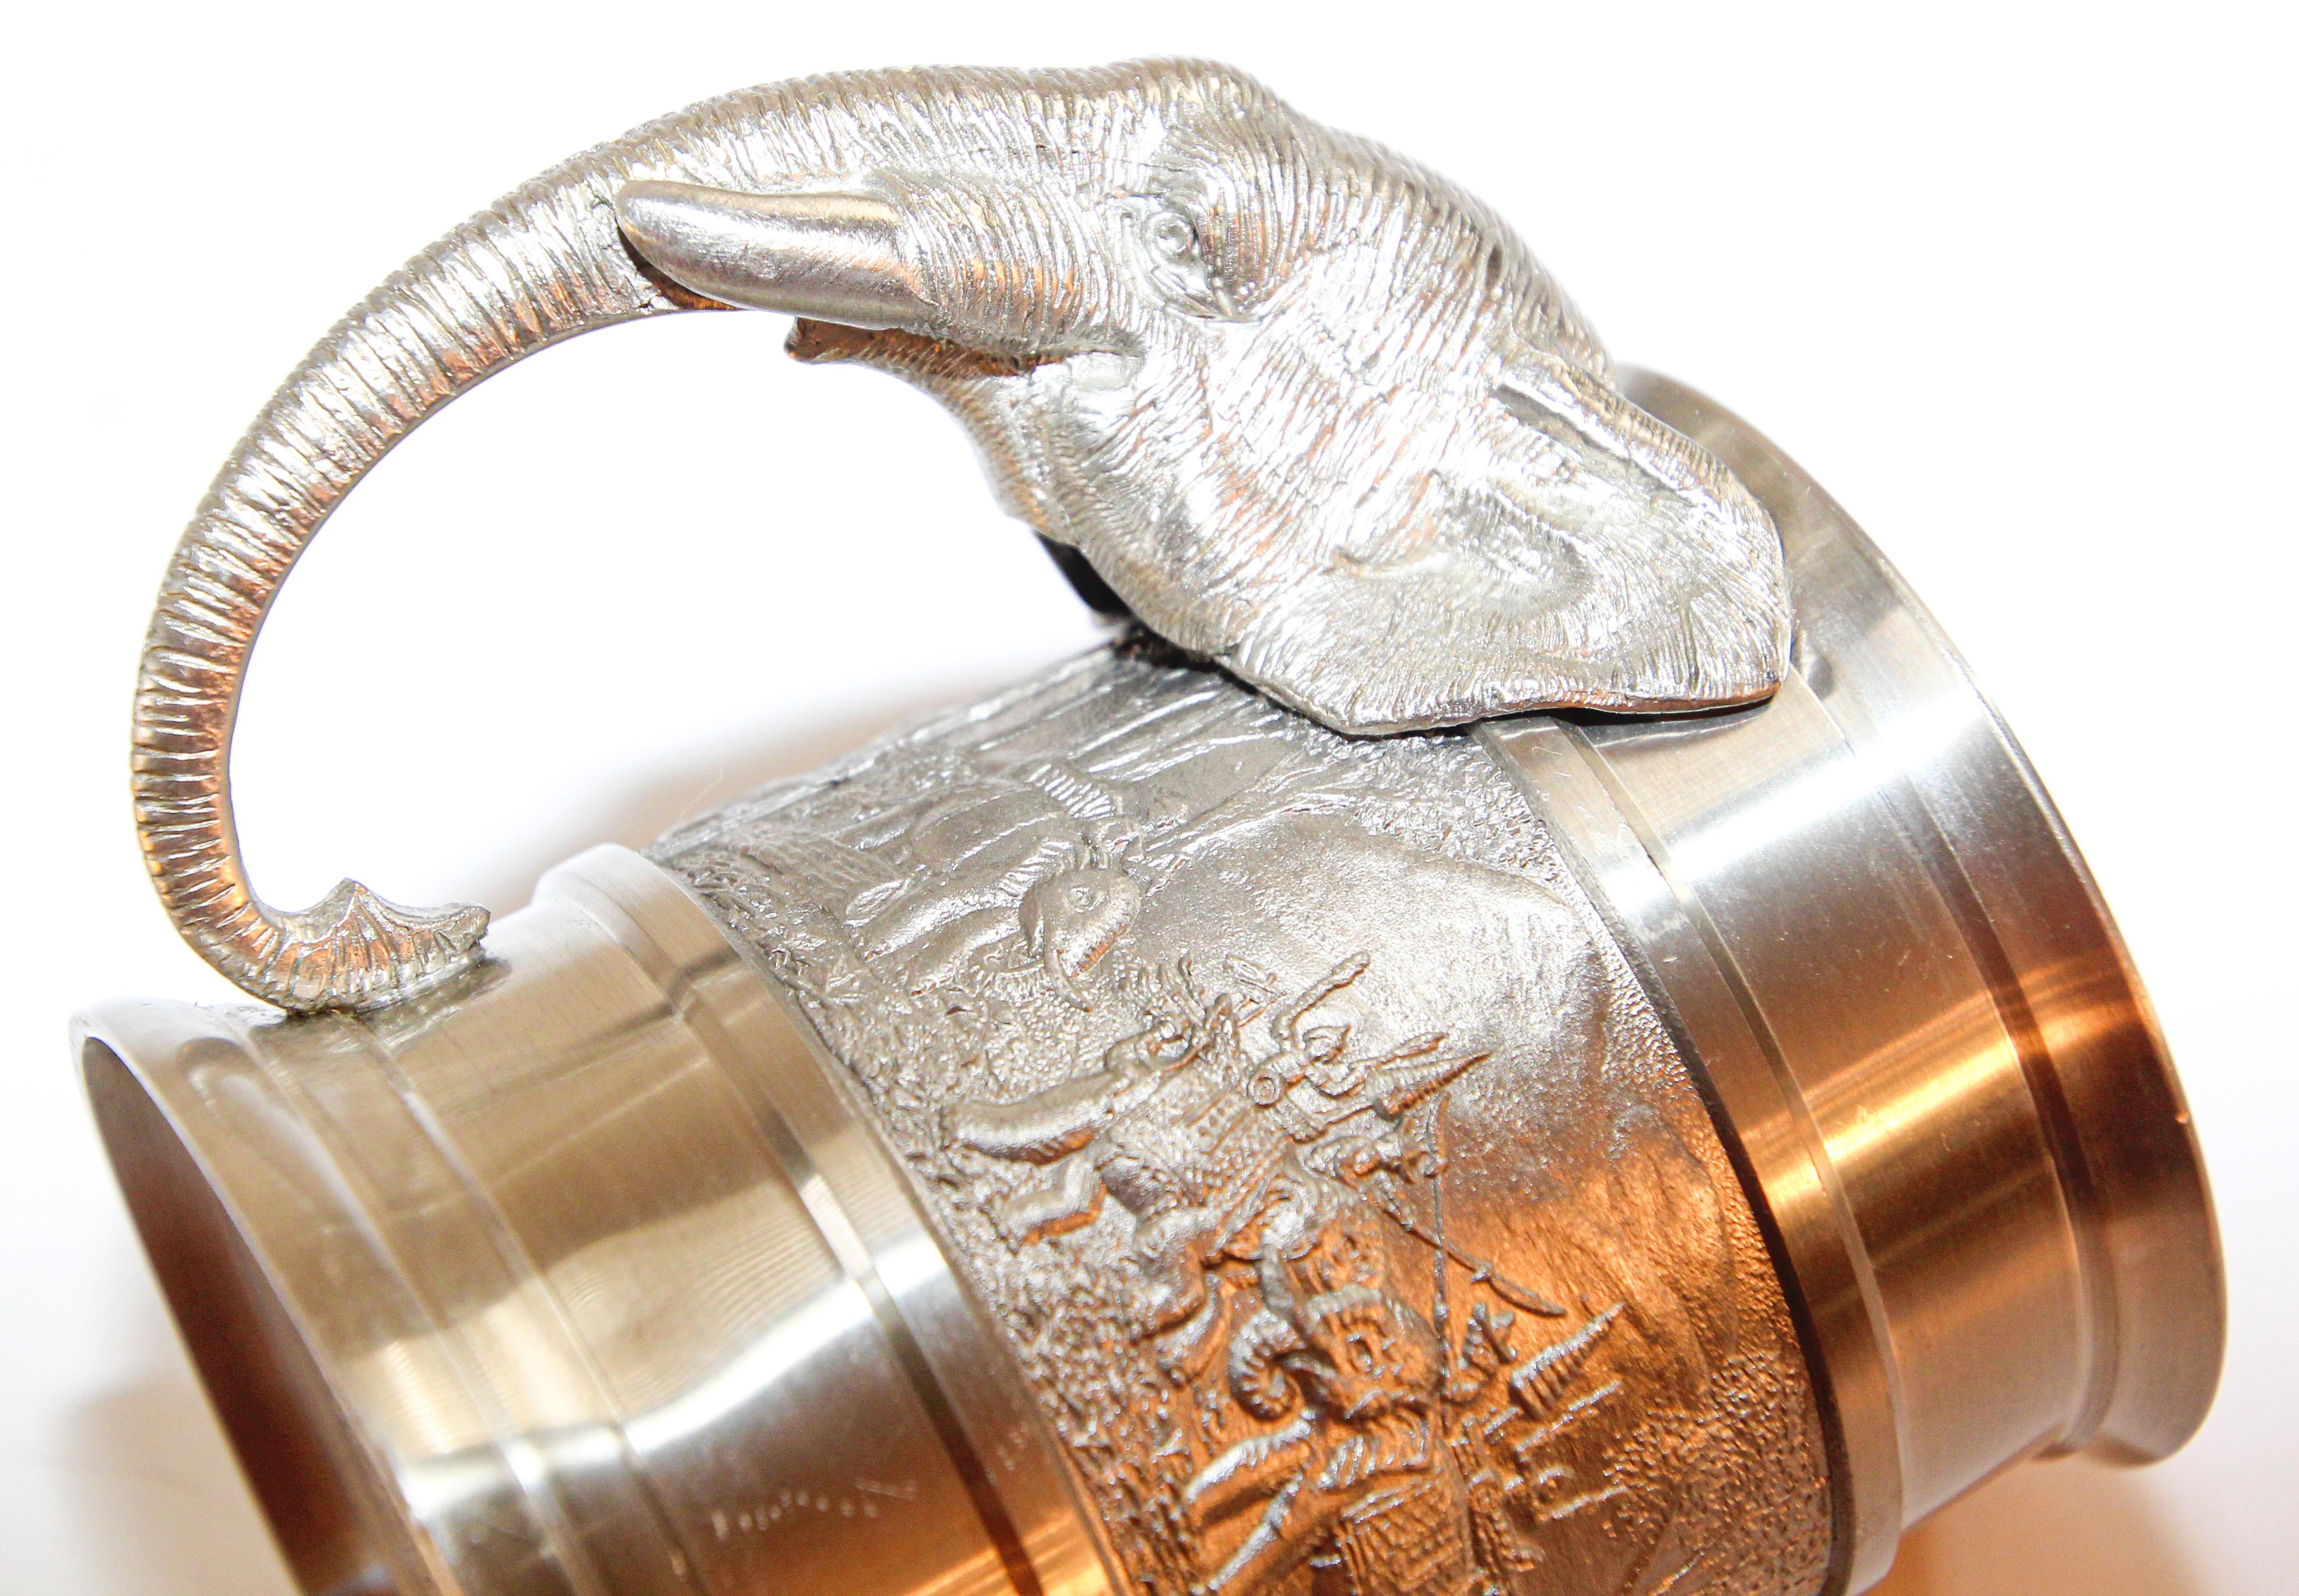 Vintage Pewter Mug from Thailand with Elephant Head Handle 5